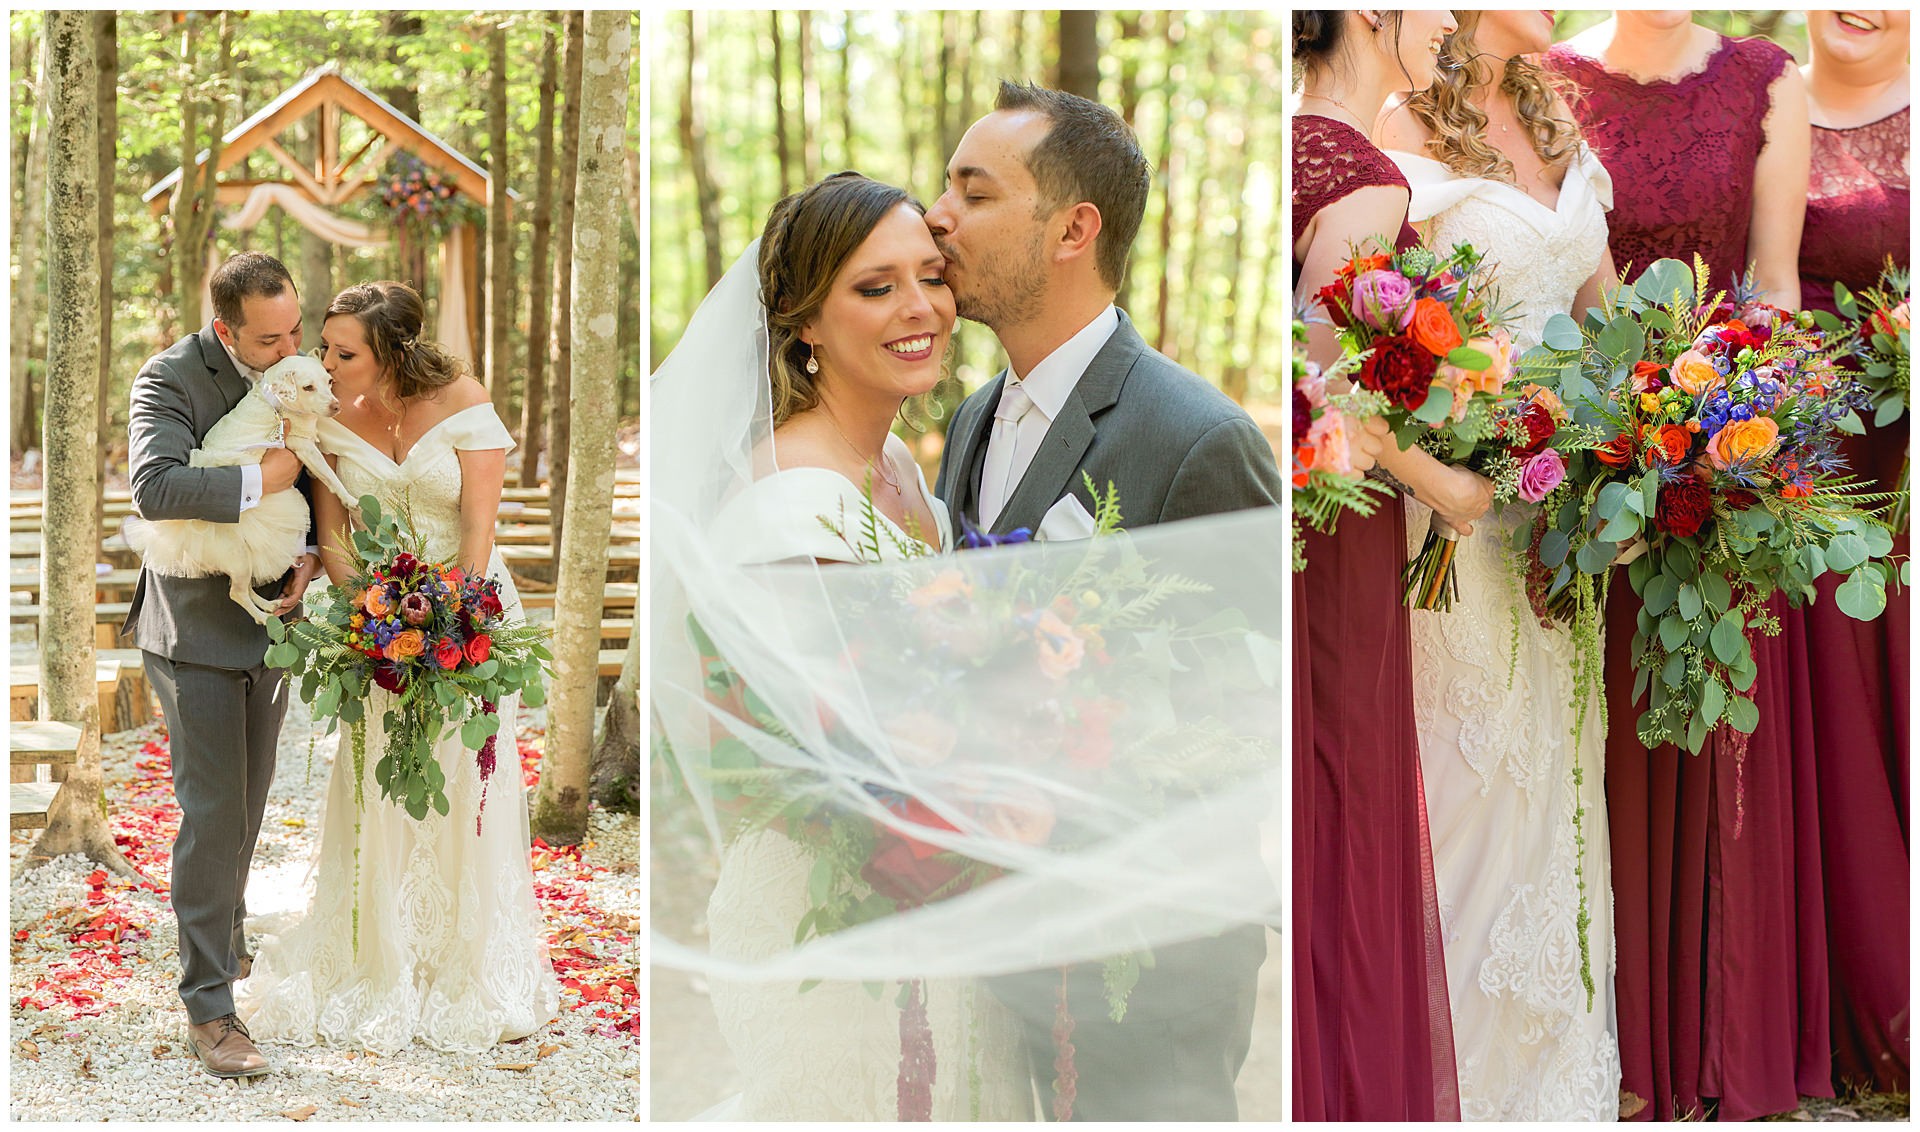 Wedding Photos at Hemlock Springs in the Red River Gorge